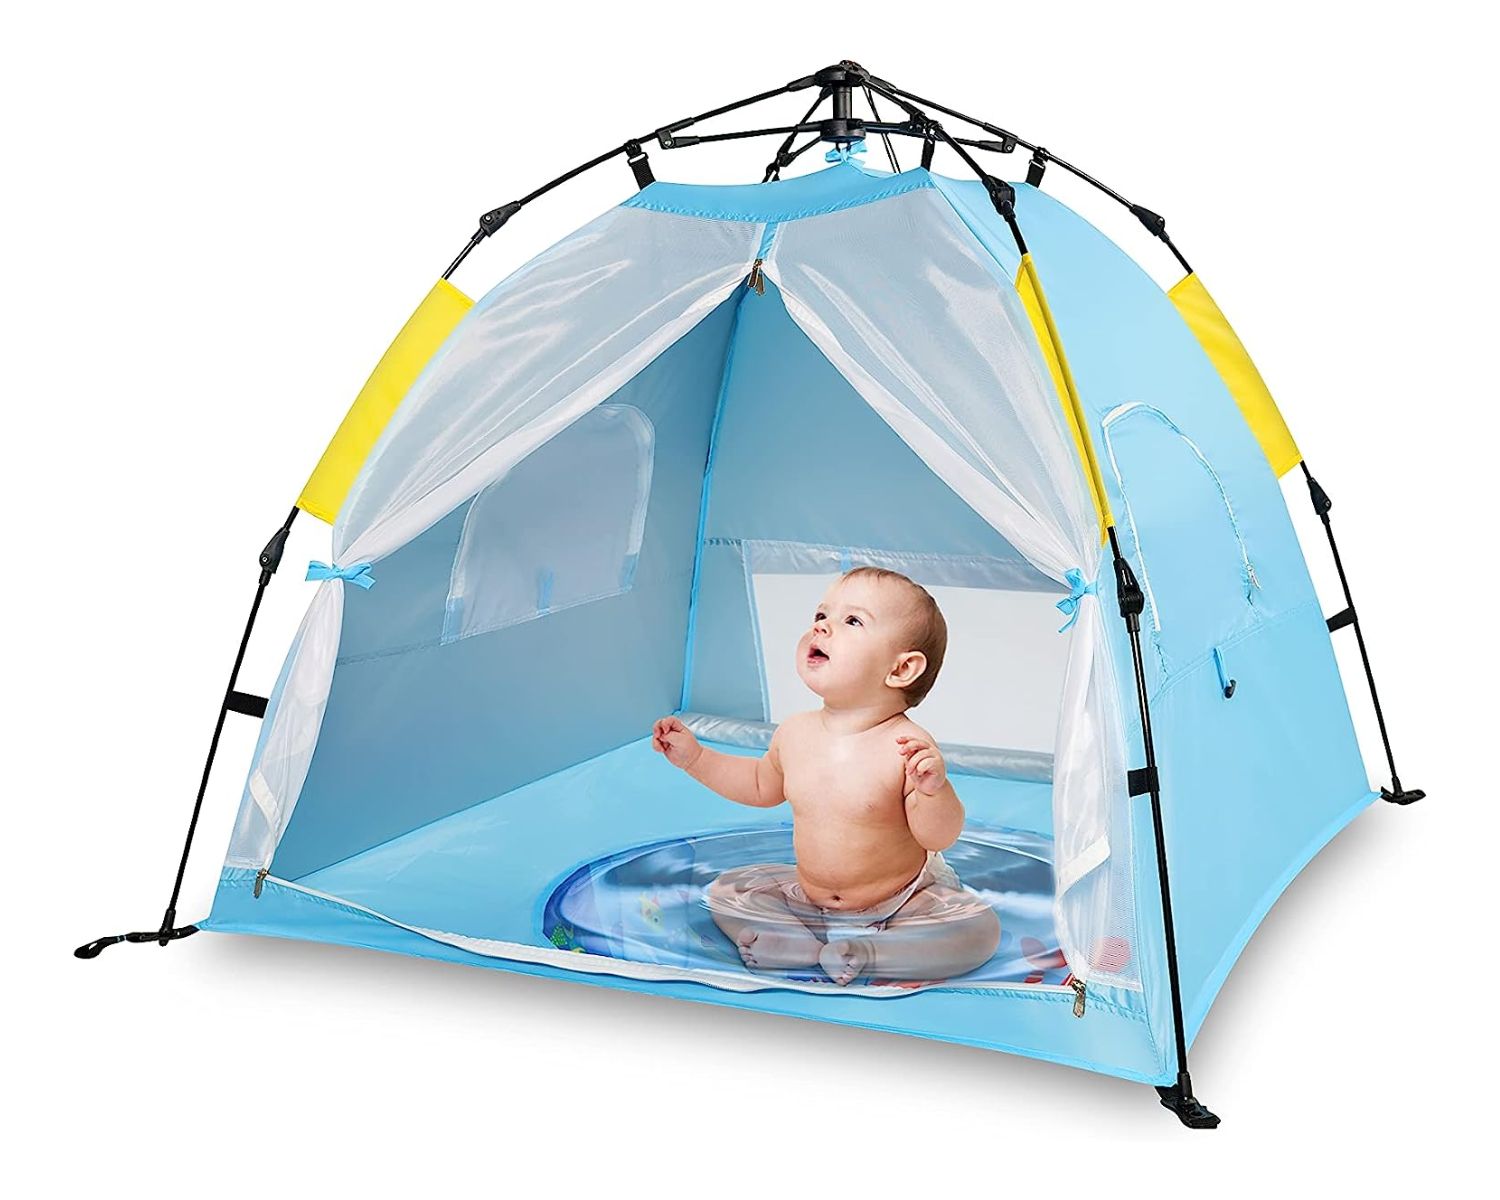 Review: Best Baby UV Tent for Beach